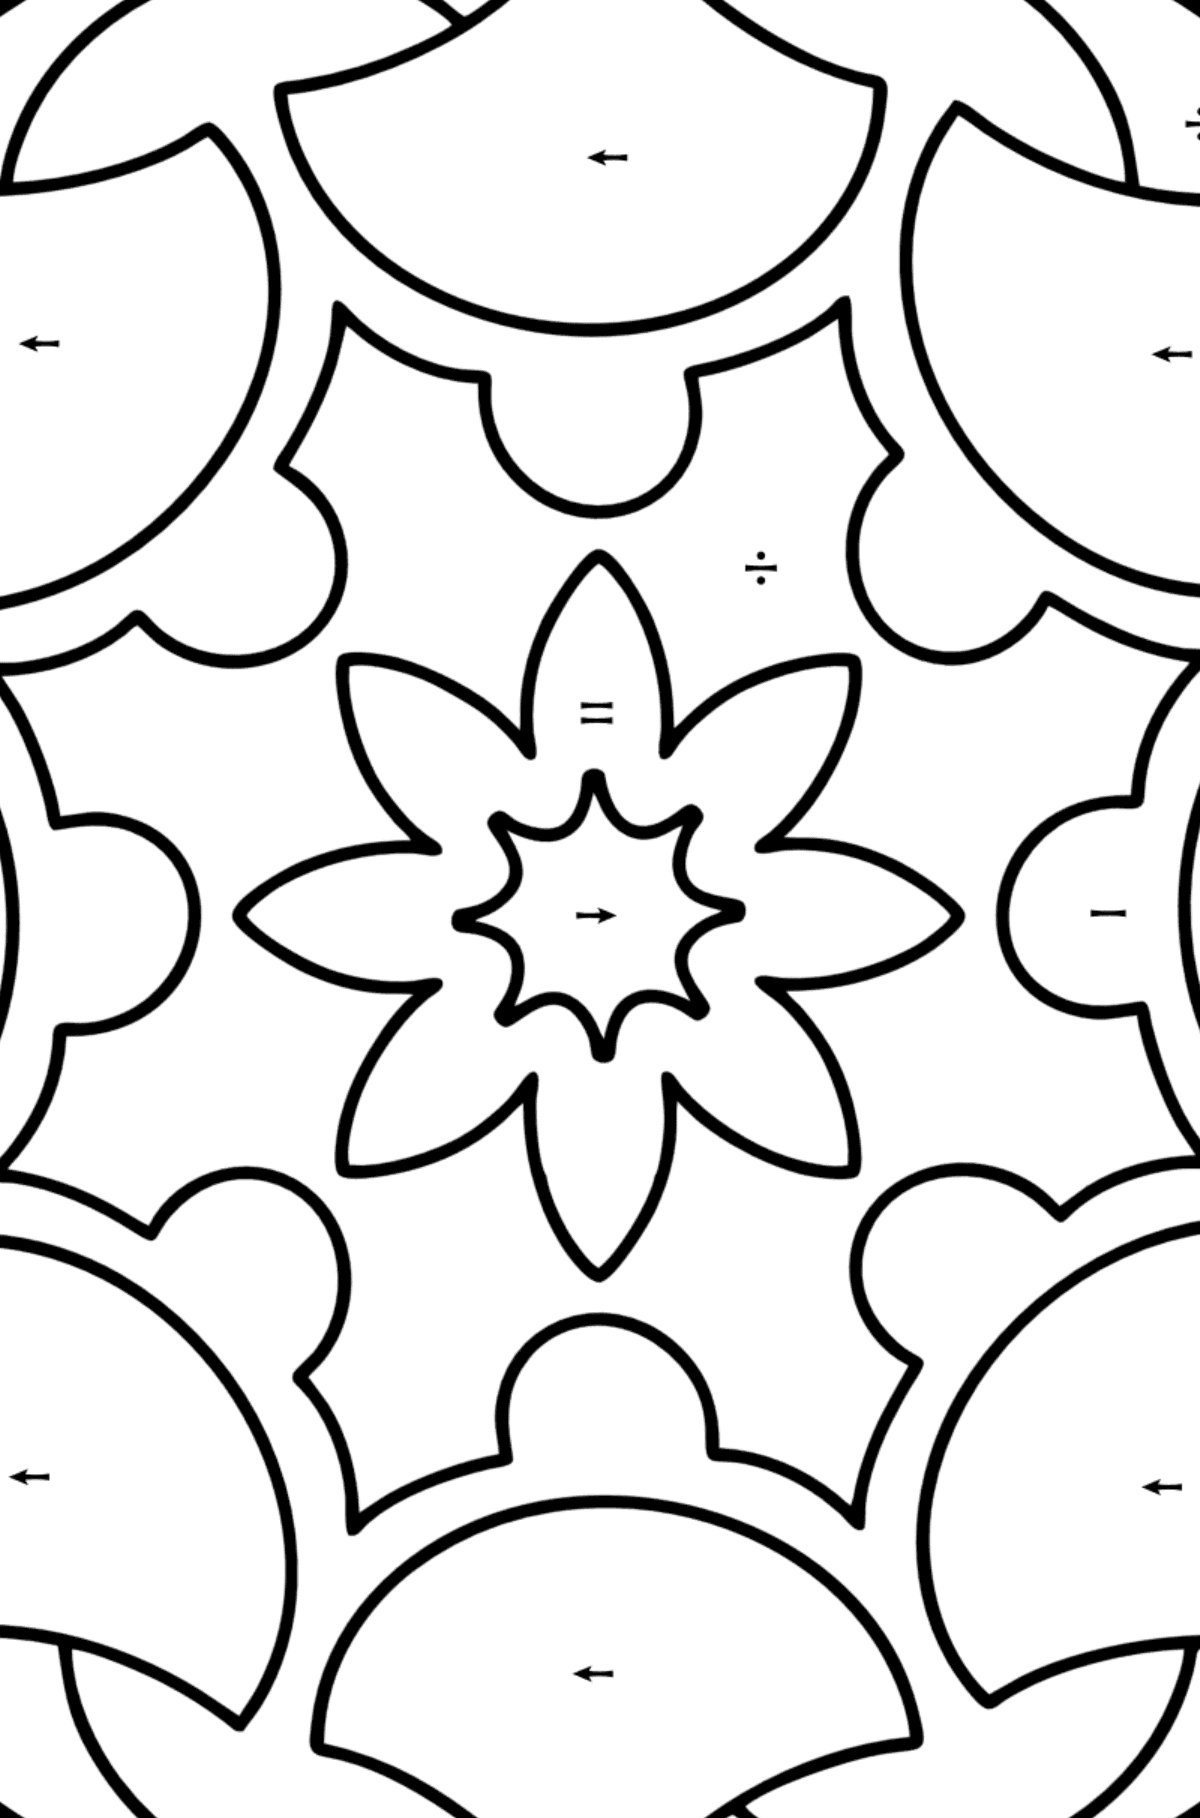 Mandala coloring page - 13 elements - Coloring by Symbols for Kids